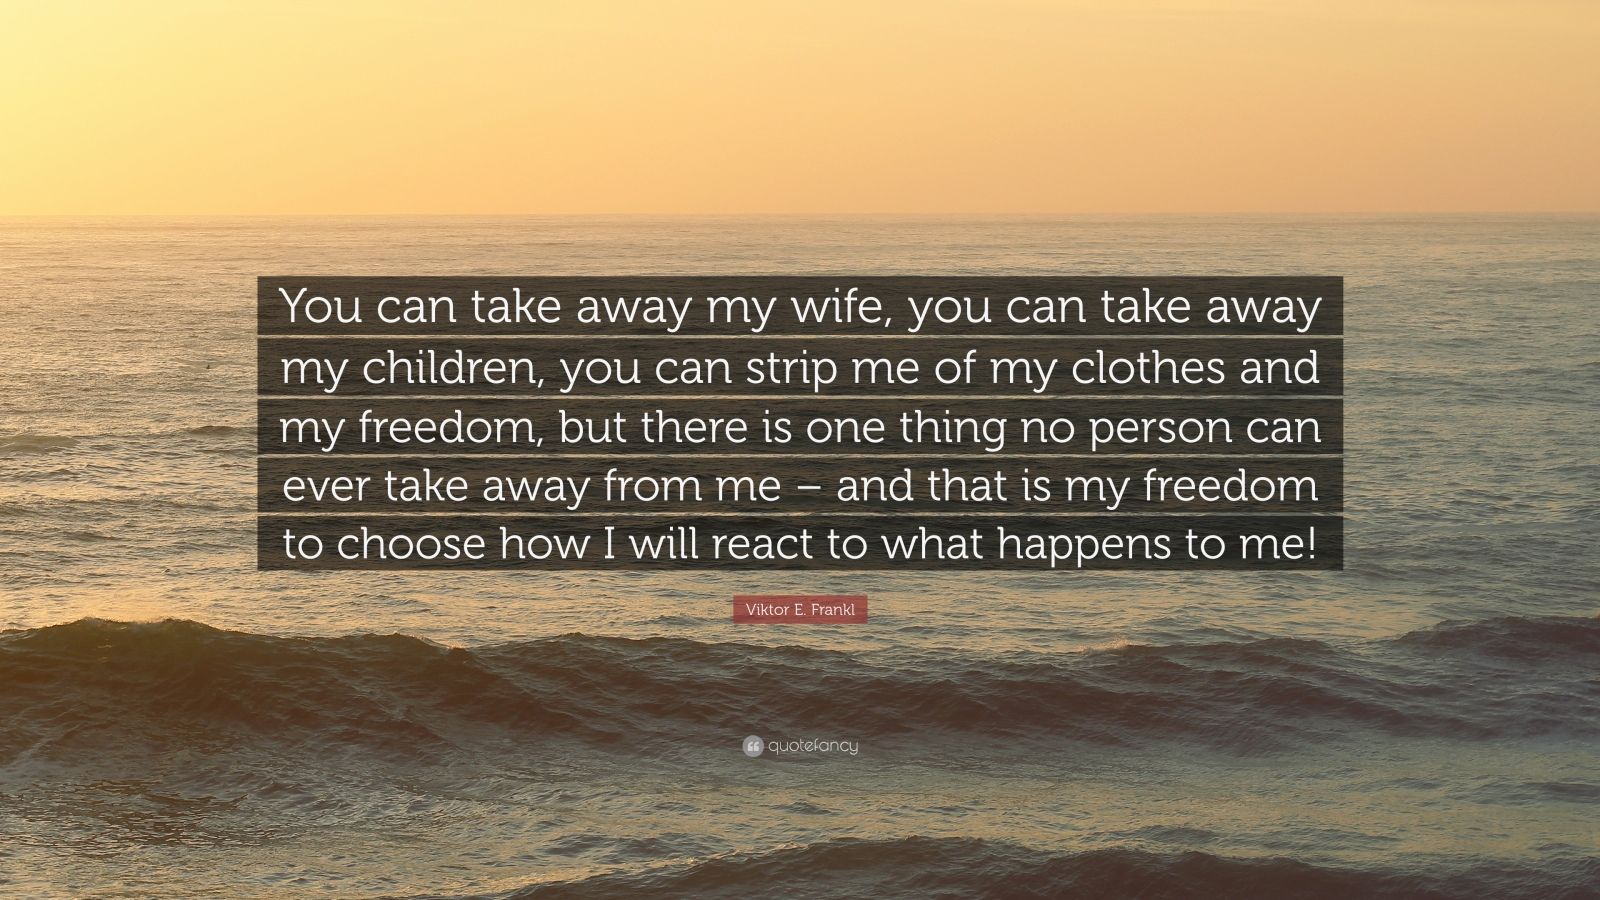 Viktor E. Frankl Quote: “You can take away my wife, you can take away